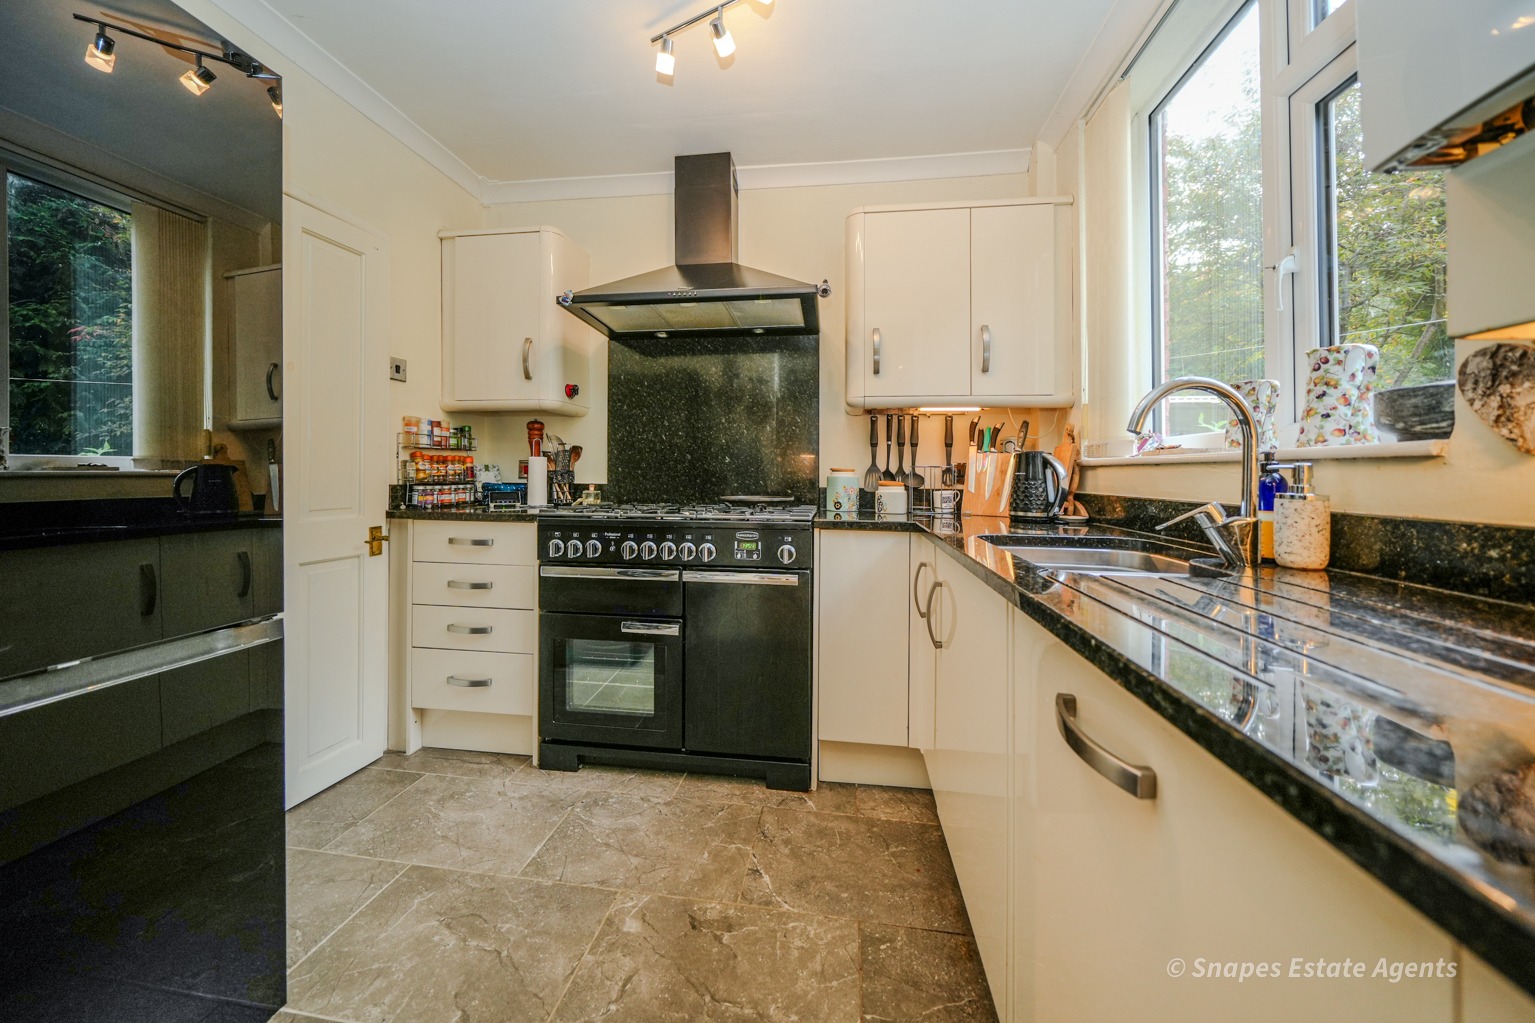 Images for Fir Road, Bramhall, Cheshire, SK7 2NP - FREEHOLD